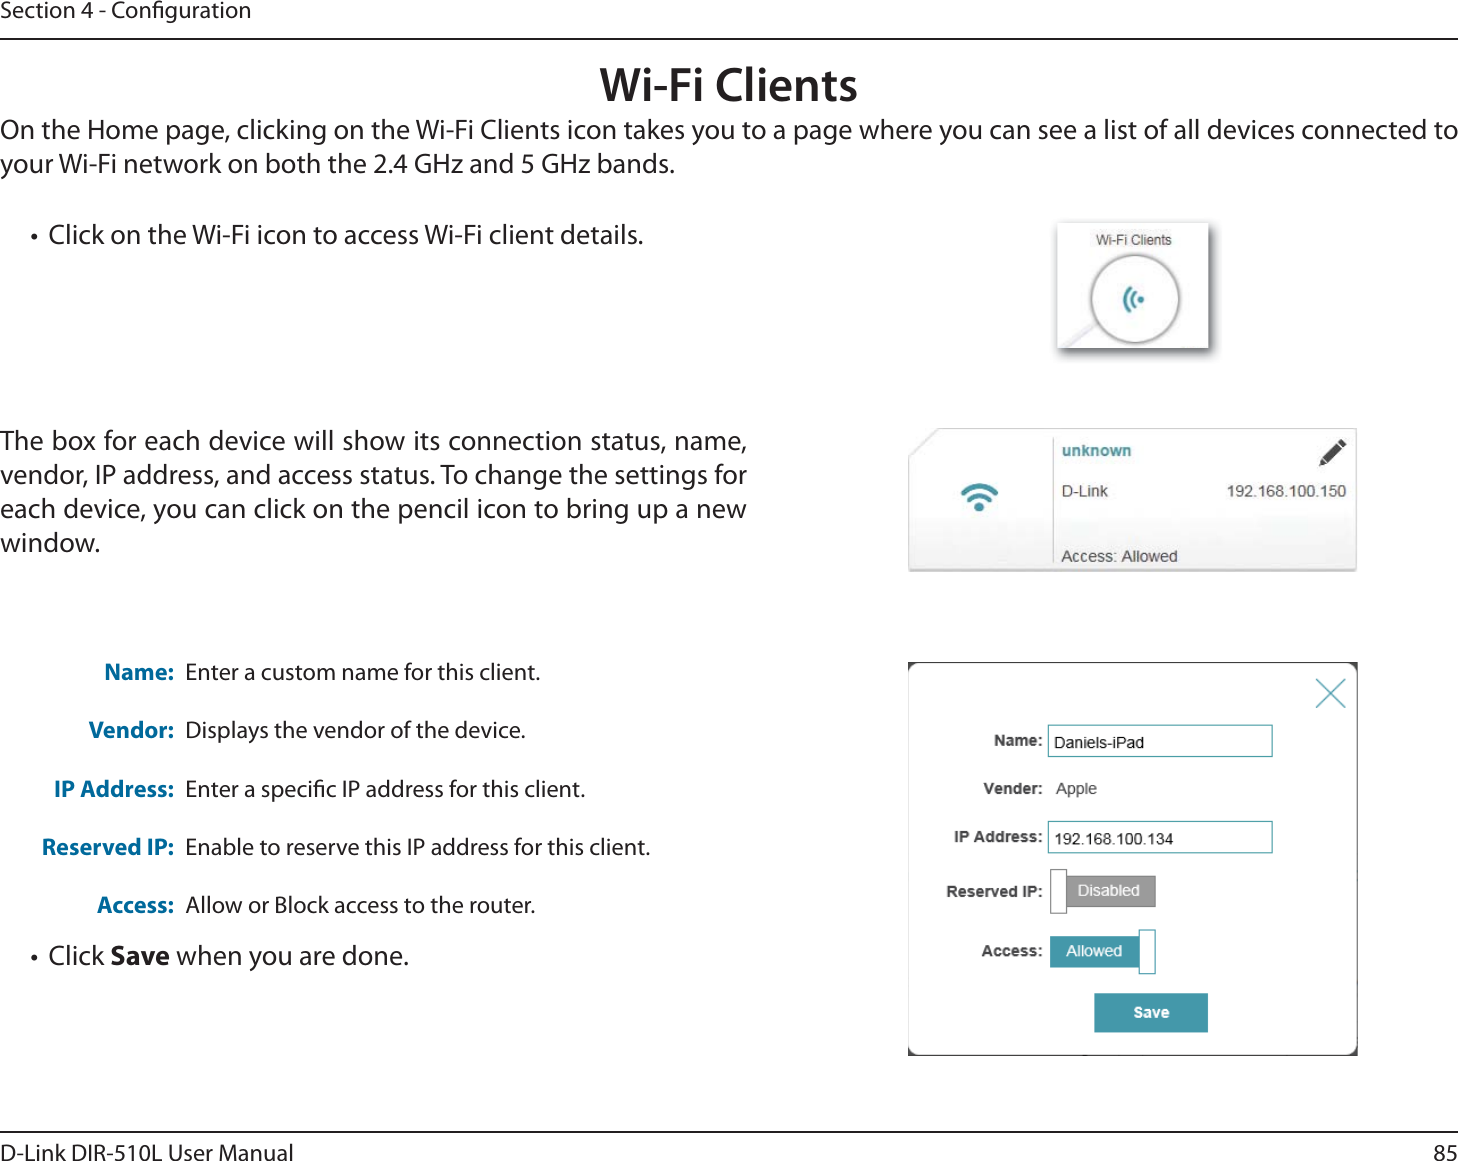 85D-Link DIR-510L User ManualSection 4 - CongurationWi-Fi ClientsOn the Home page, clicking on the Wi-Fi Clients icon takes you to a page where you can see a list of all devices connected to your Wi-Fi network on both the 2.4 GHz and 5 GHz bands. Name:Vendor:IP Address:Reserved IP:Access:Enter a custom name for this client.Displays the vendor of the device.Enter a specic IP address for this client.Enable to reserve this IP address for this client.Allow or Block access to the router.The box for each device will show its connection status, name, vendor, IP address, and access status. To change the settings for each device, you can click on the pencil icon to bring up a new window.t Click Save when you are done.t Click on the Wi-Fi icon to access Wi-Fi client details.